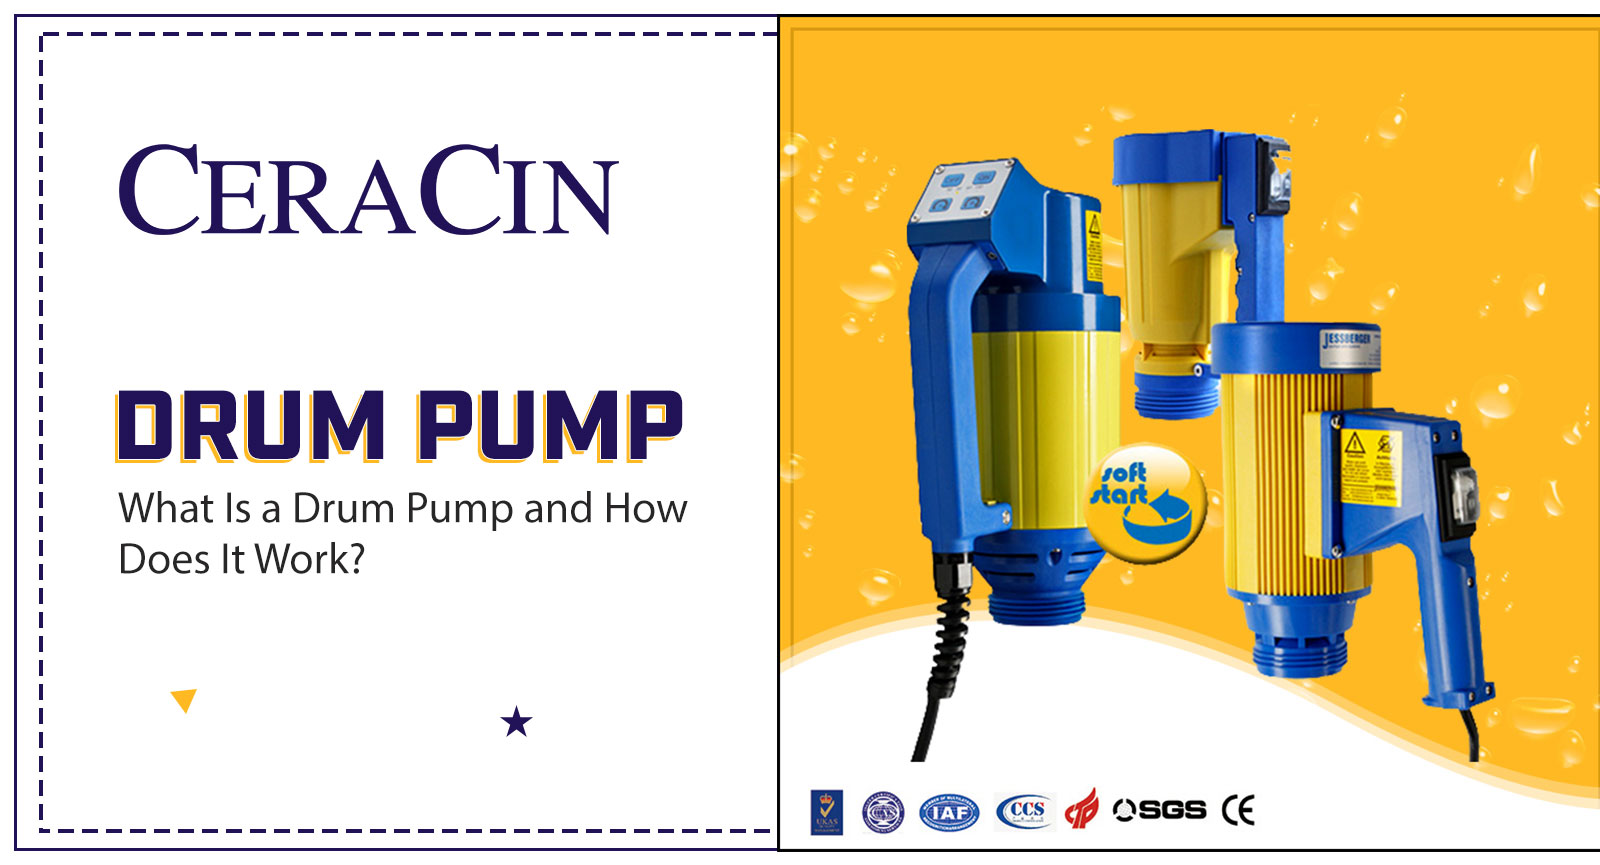  What Is a Drum Pump and How Does It Work?